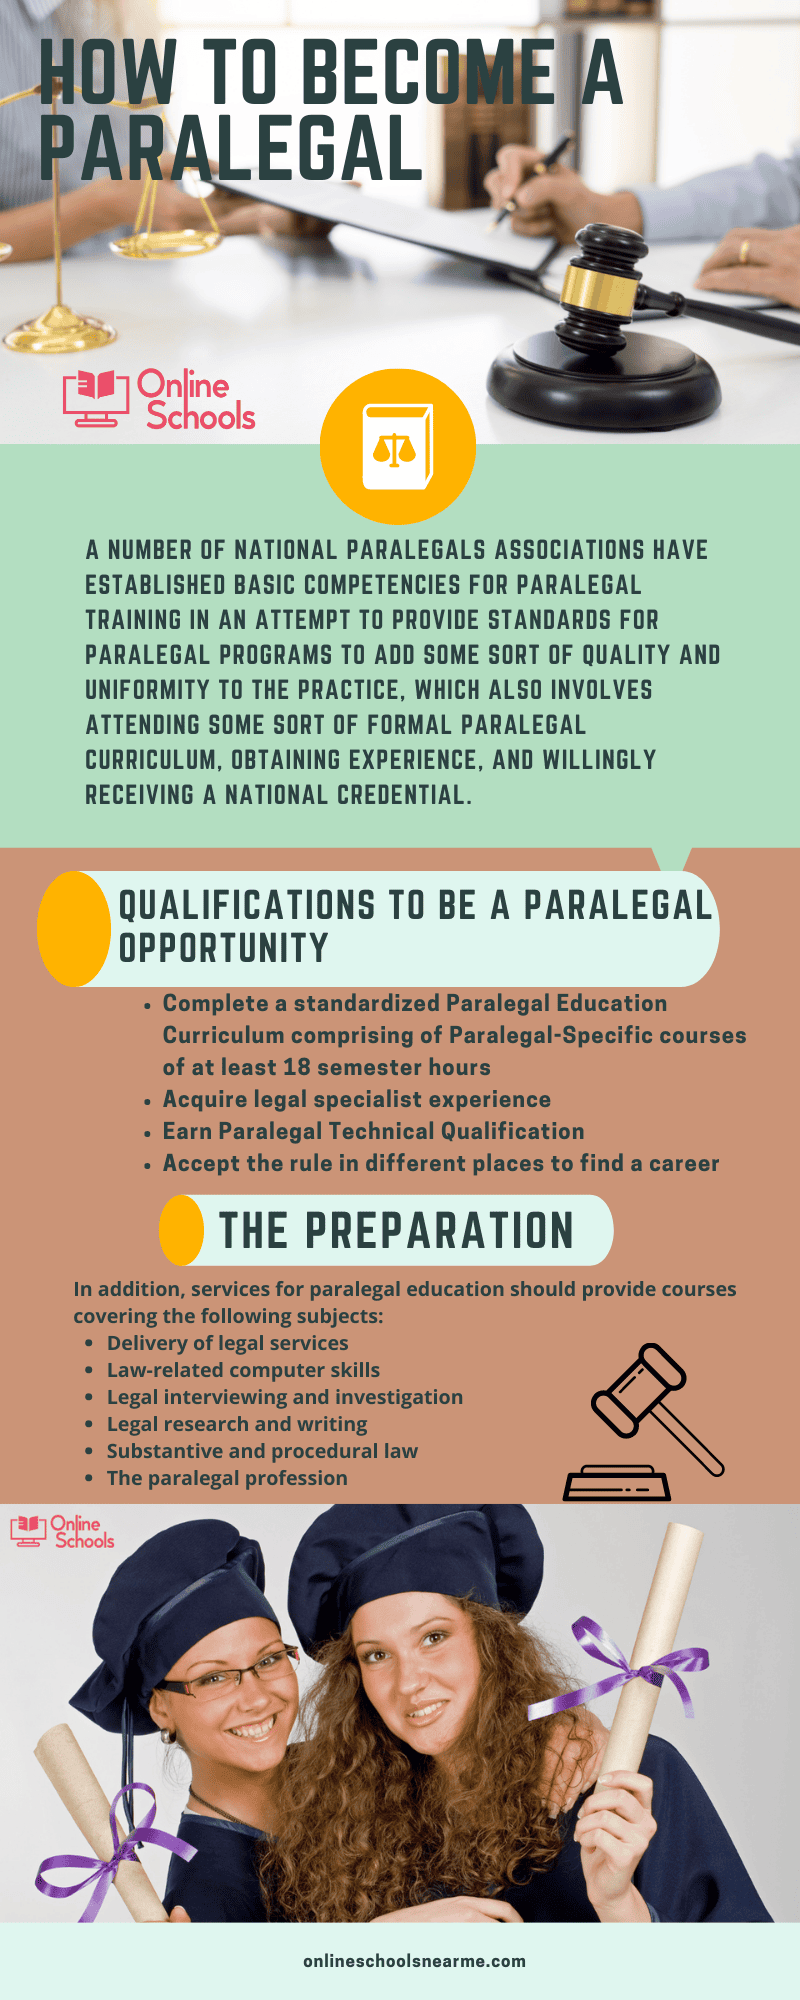 HOW TO BECOME A PARALEGAL